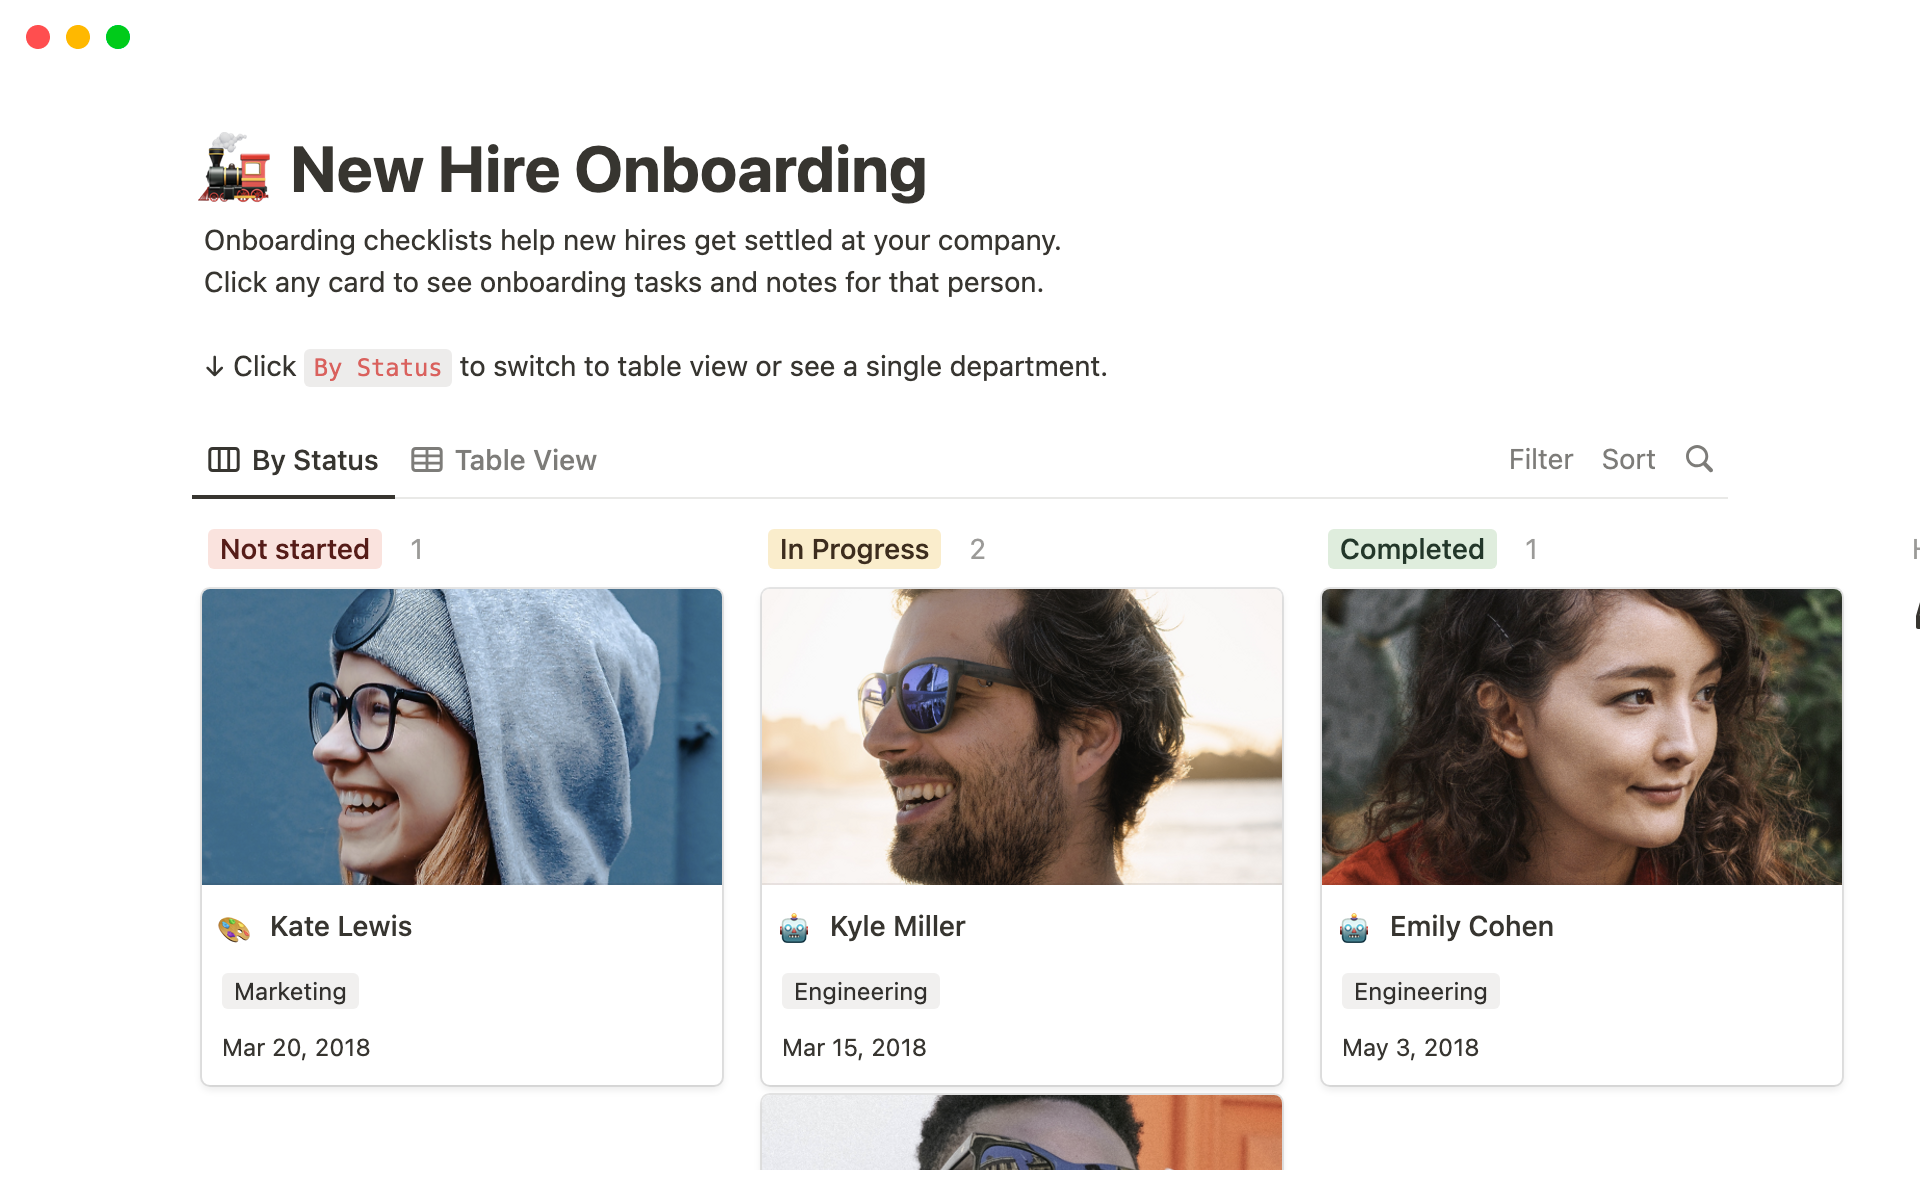 The desktop image for the New hire onboarding template.